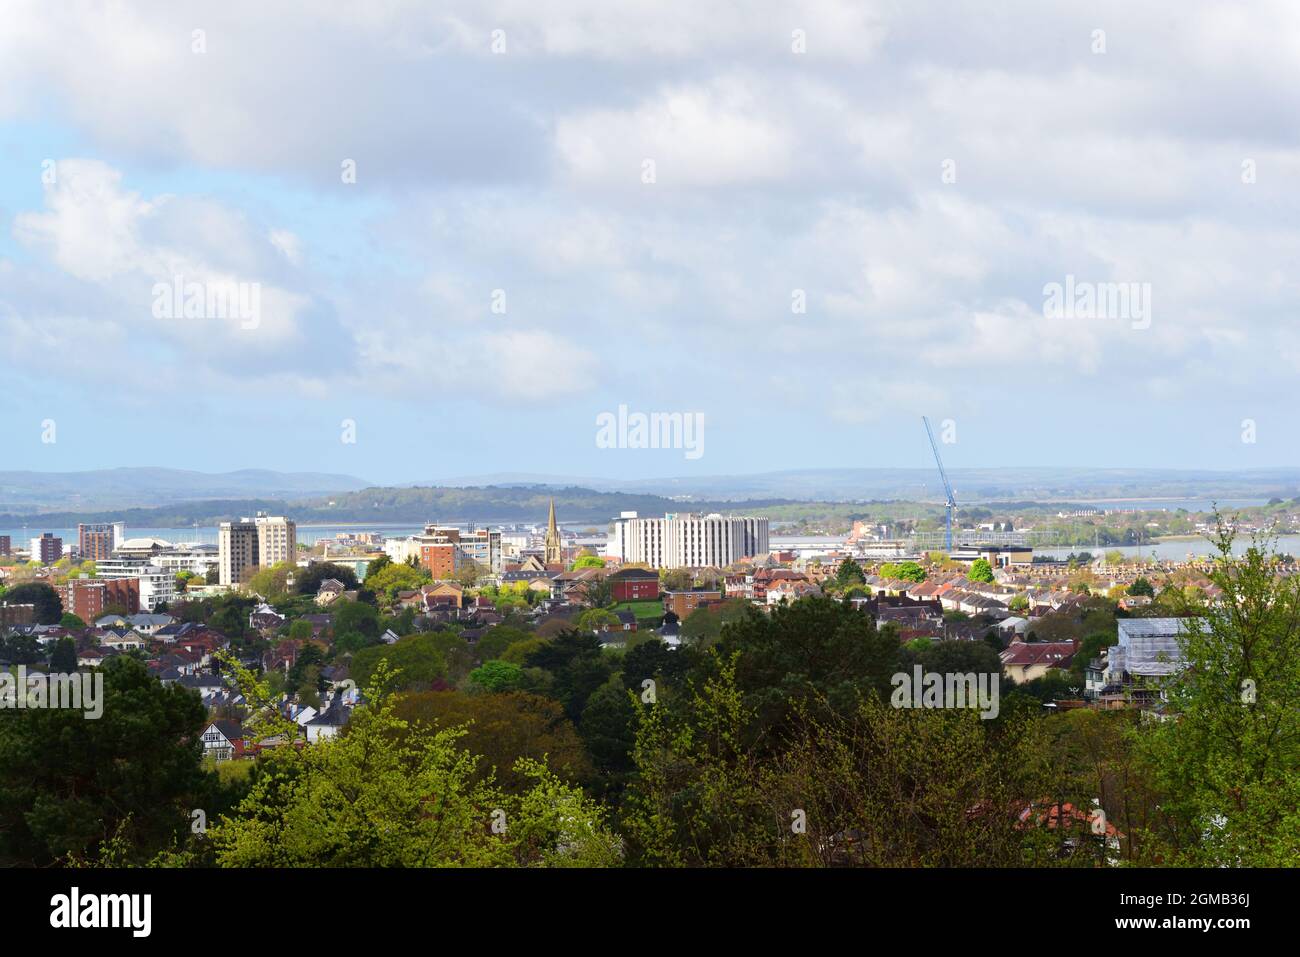 View over Poole town centre and Poole Harbour, with the Purbeck hills in the background. The Barclays building can be seen in the centre. Stock Photo